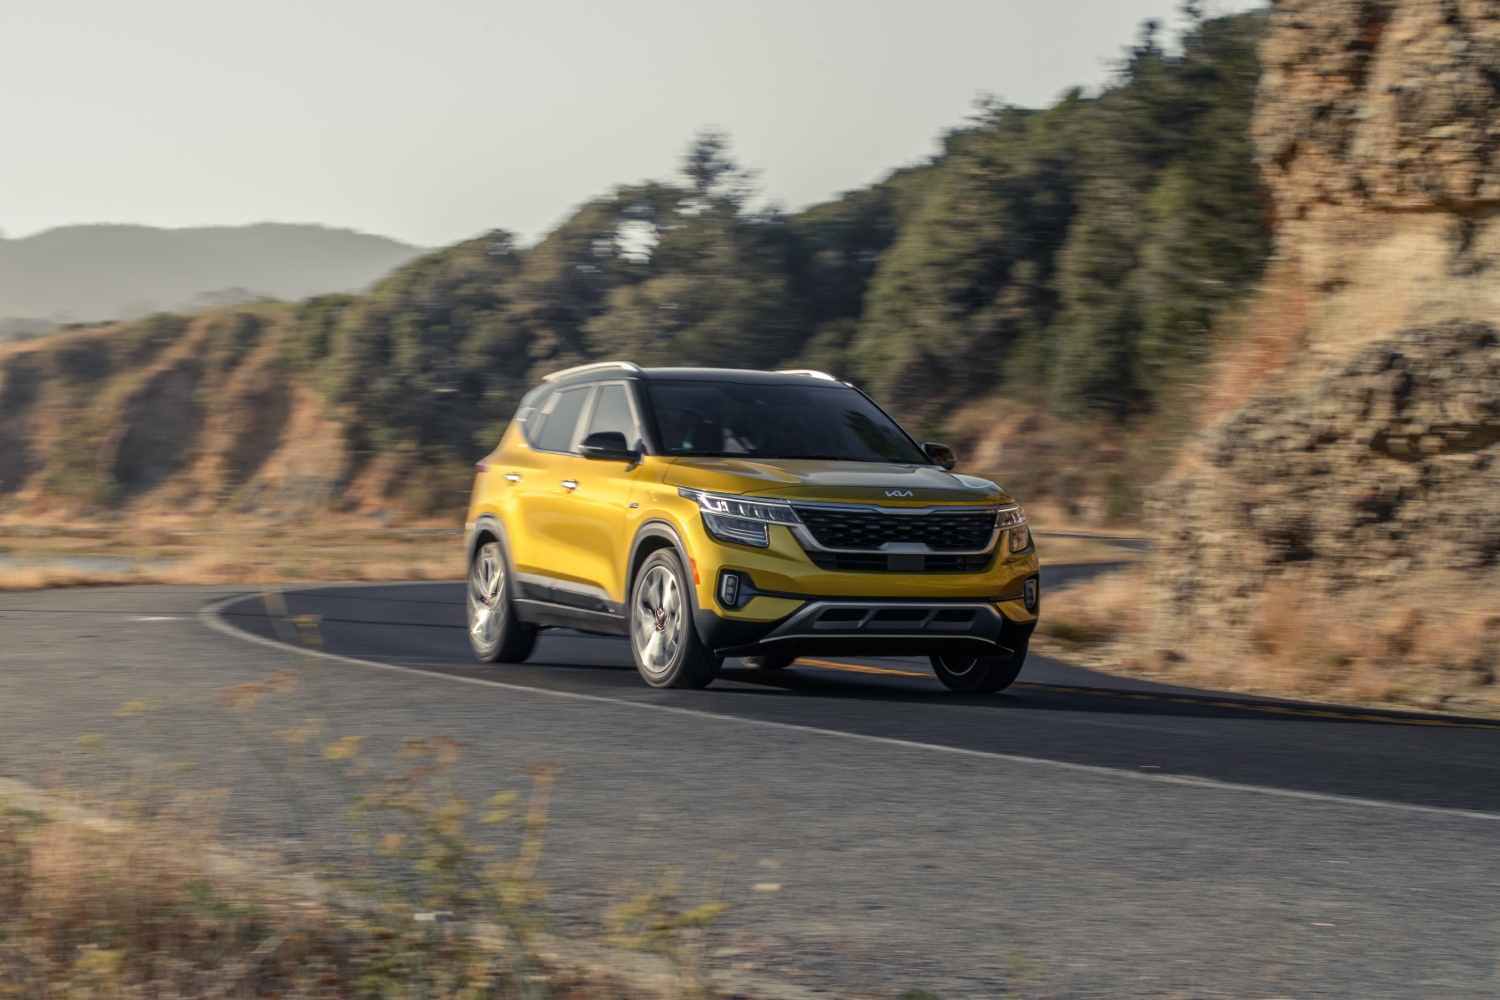 Among the least satisfying SUVs for 2023 is this Kia Seltos